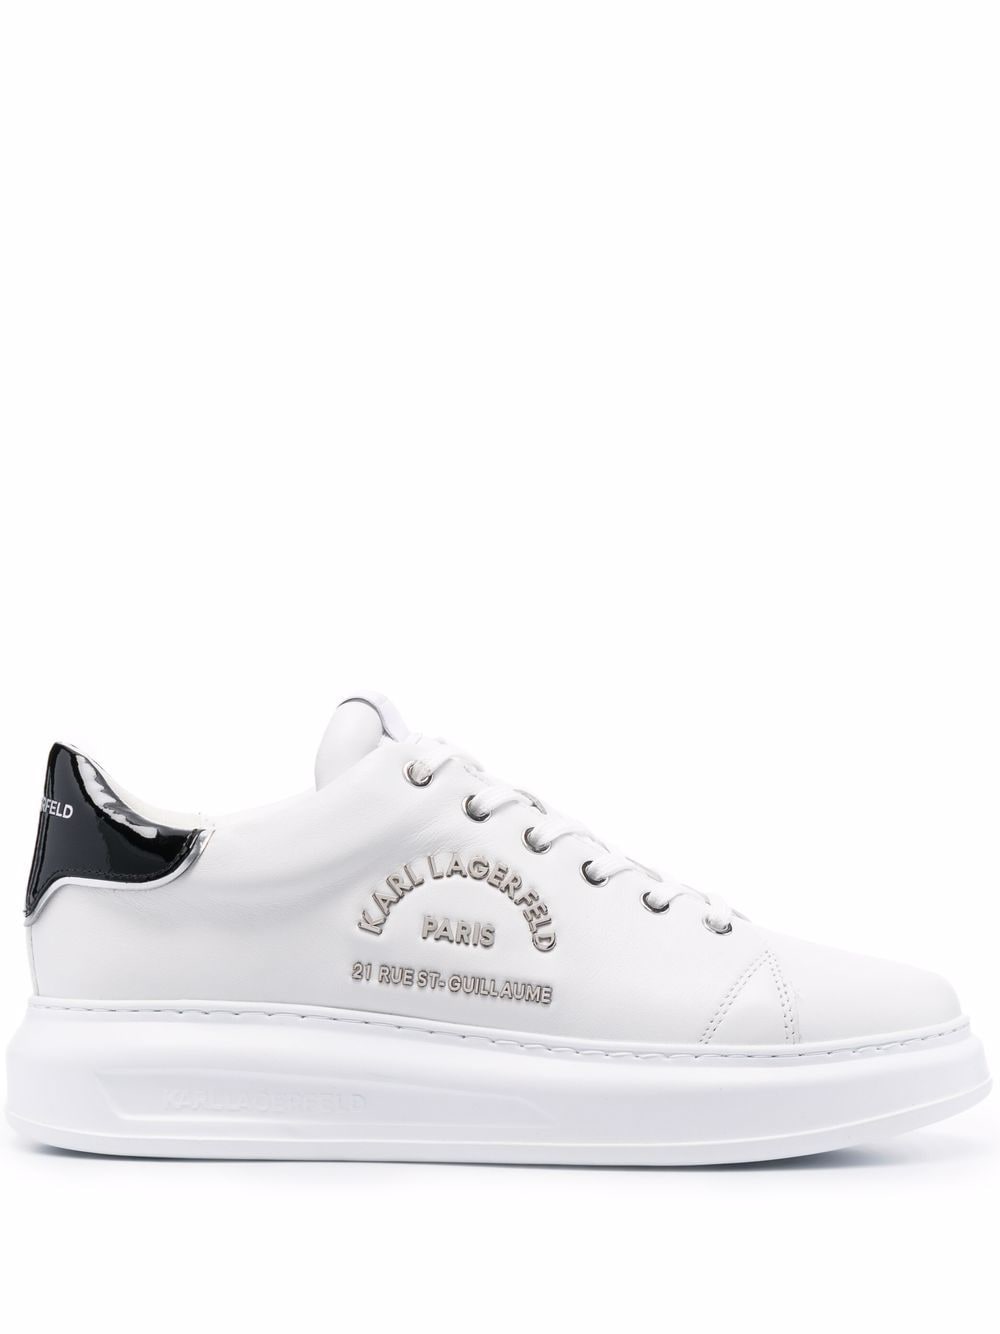 Karl Lagerfeld Rue St Guillaume low-top lace-up sneakers - White von Karl Lagerfeld